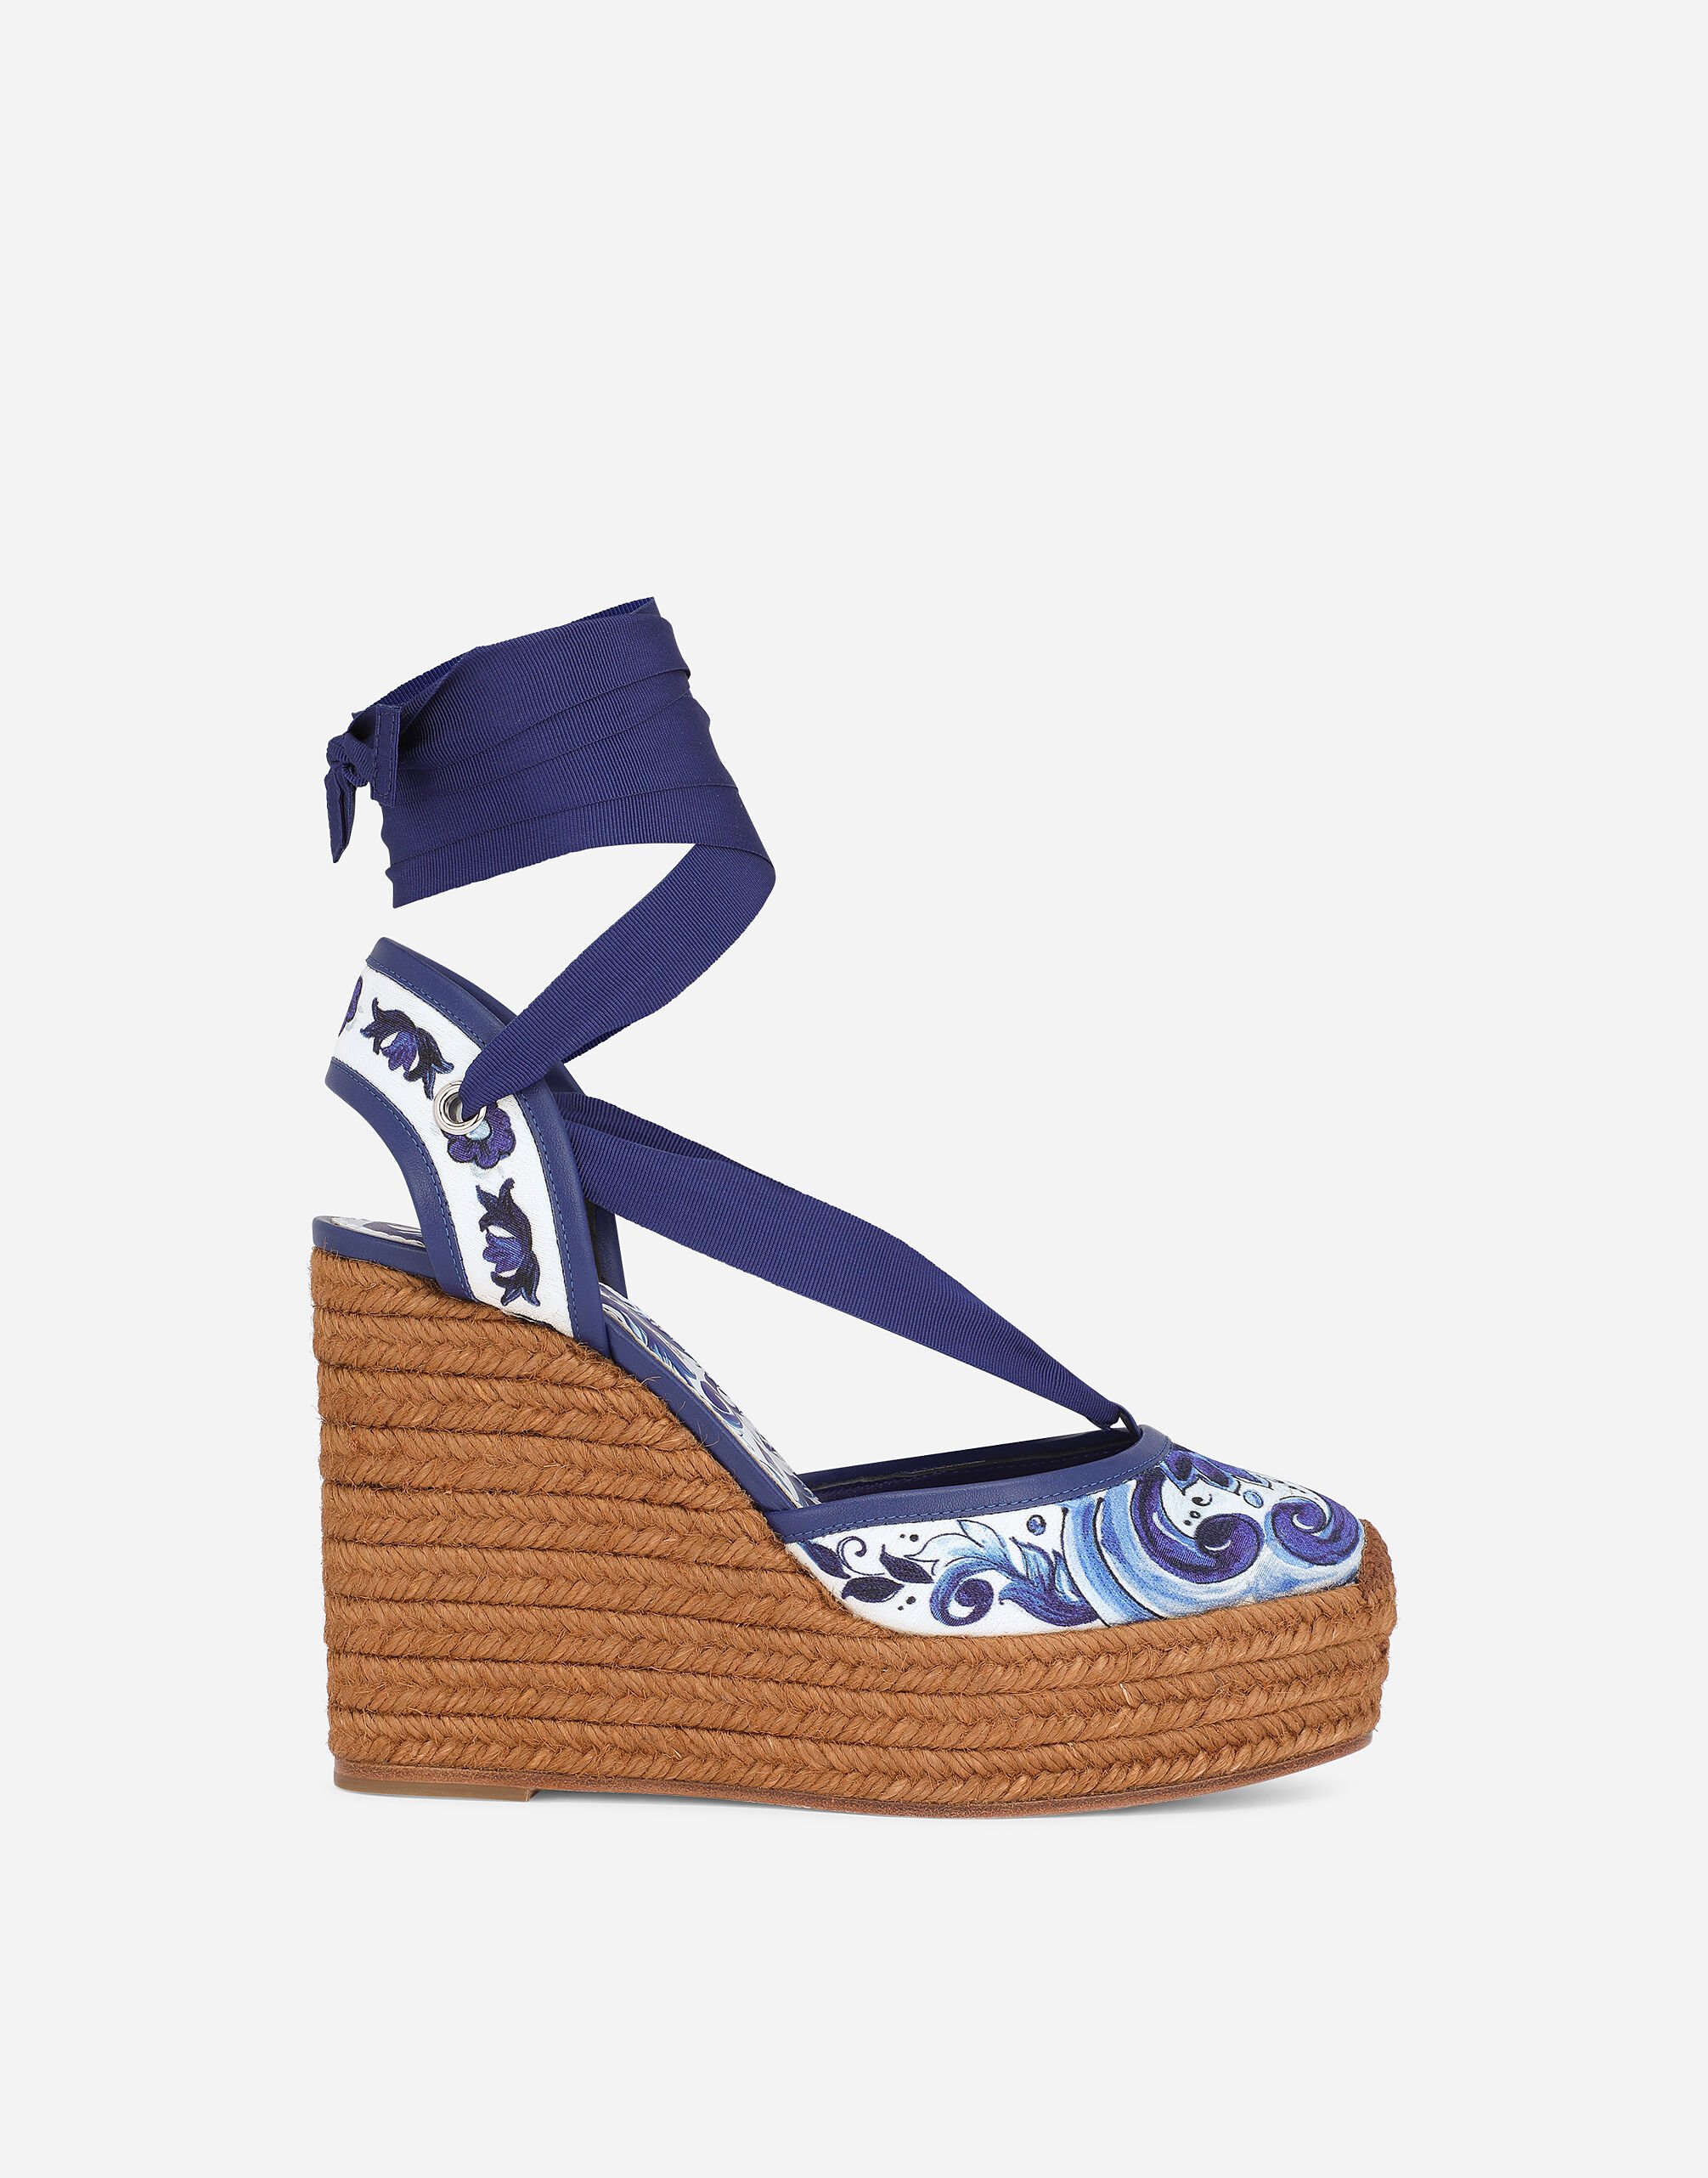 Dolce & Gabbana Rope-soled wedges in printed brocade fabric Multicolor CR1686AR422